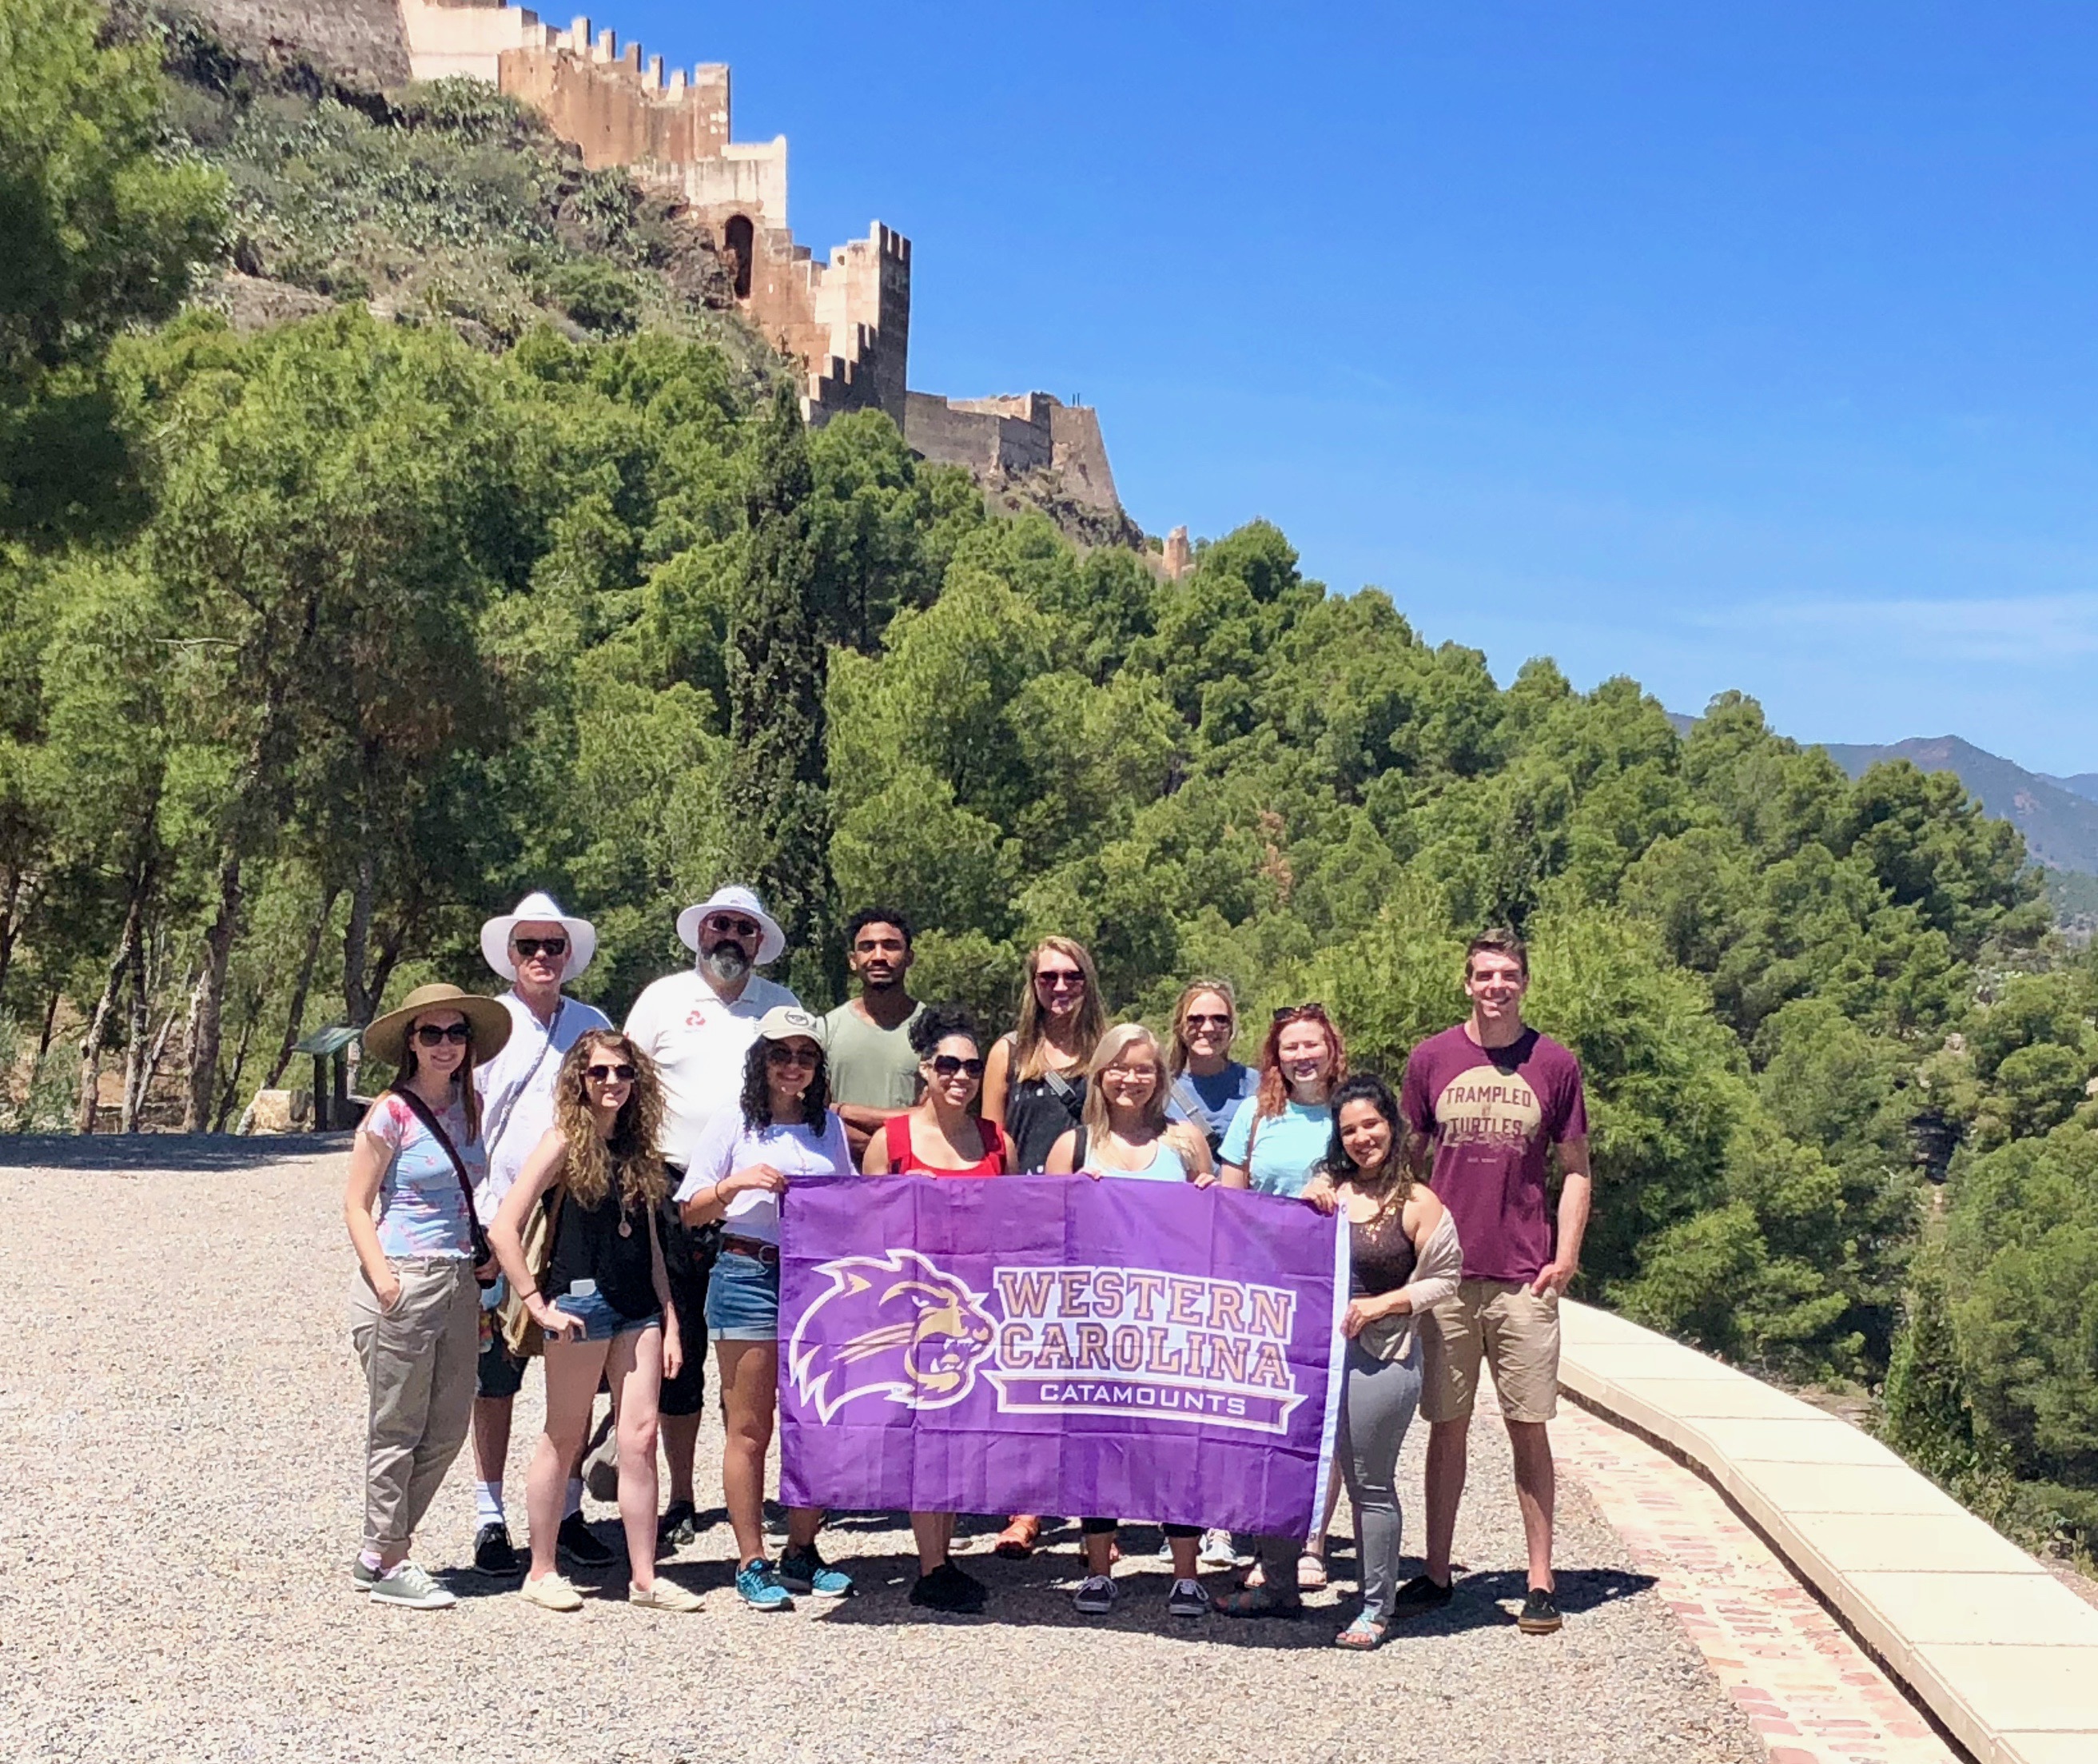 Faculty Led Study Abroad Course in Spain